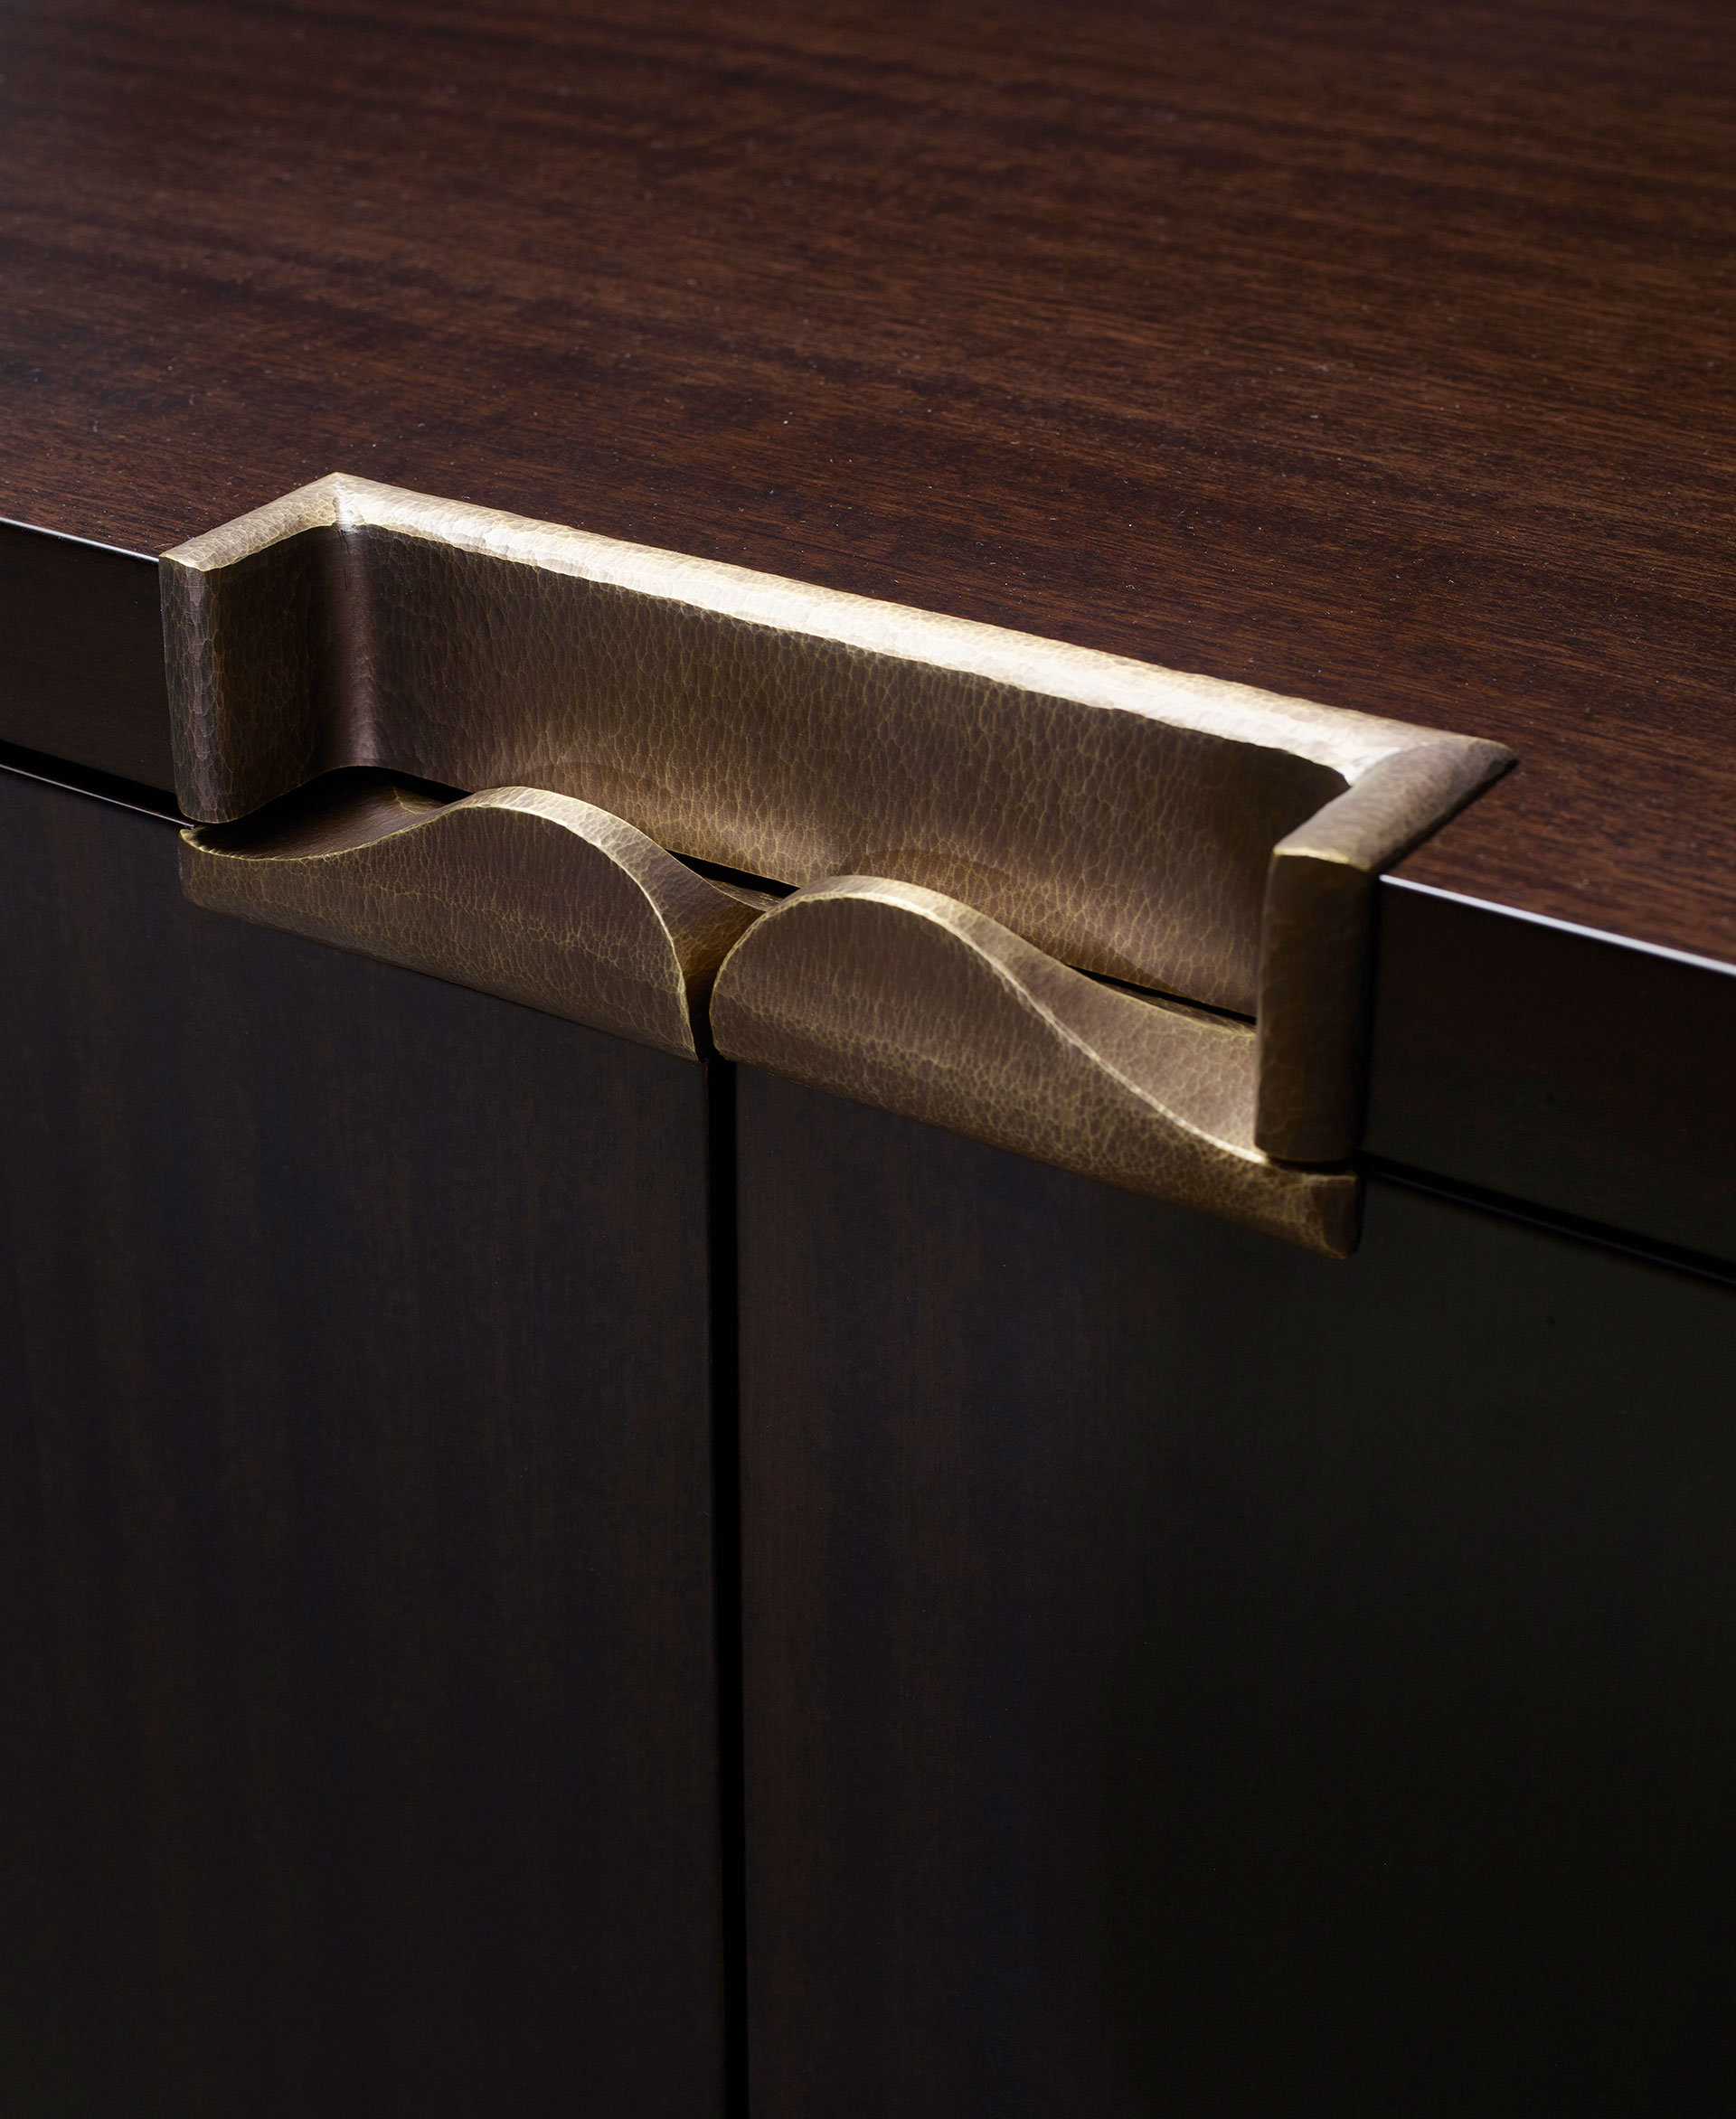 Bronze handle detail of Margot, a wooden cabinet with bronze base, handle and hinges from Promemoria's catalogue | Promemoria